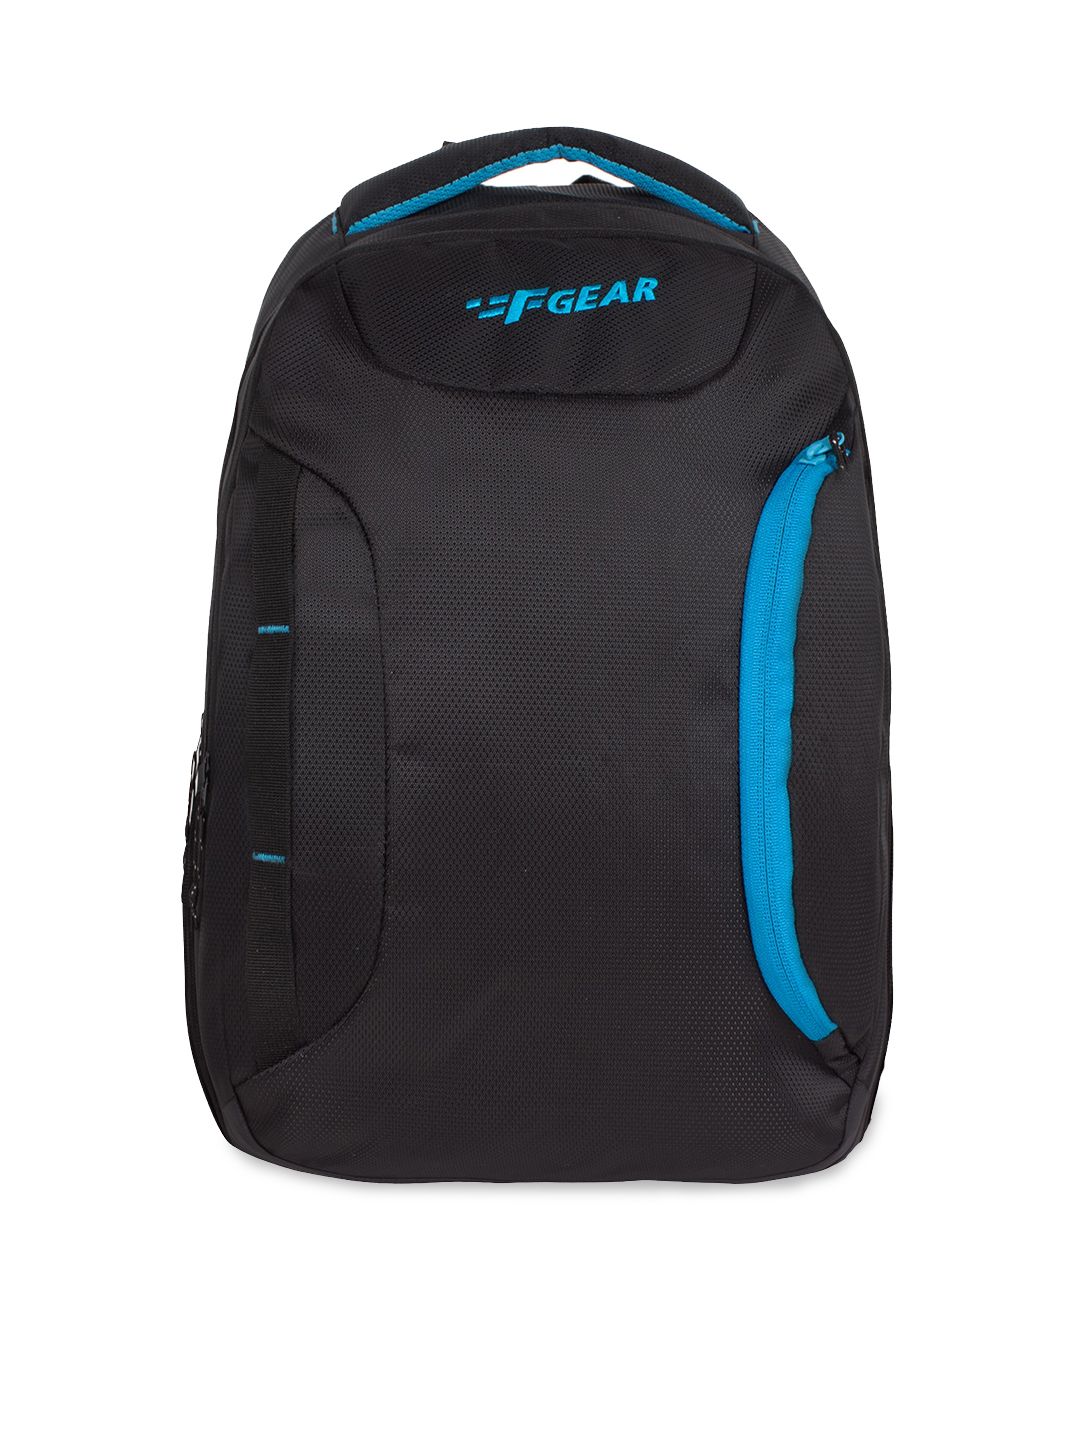 F Gear Unisex Black & Blue 18 Inch Laptop Backpack Price in India